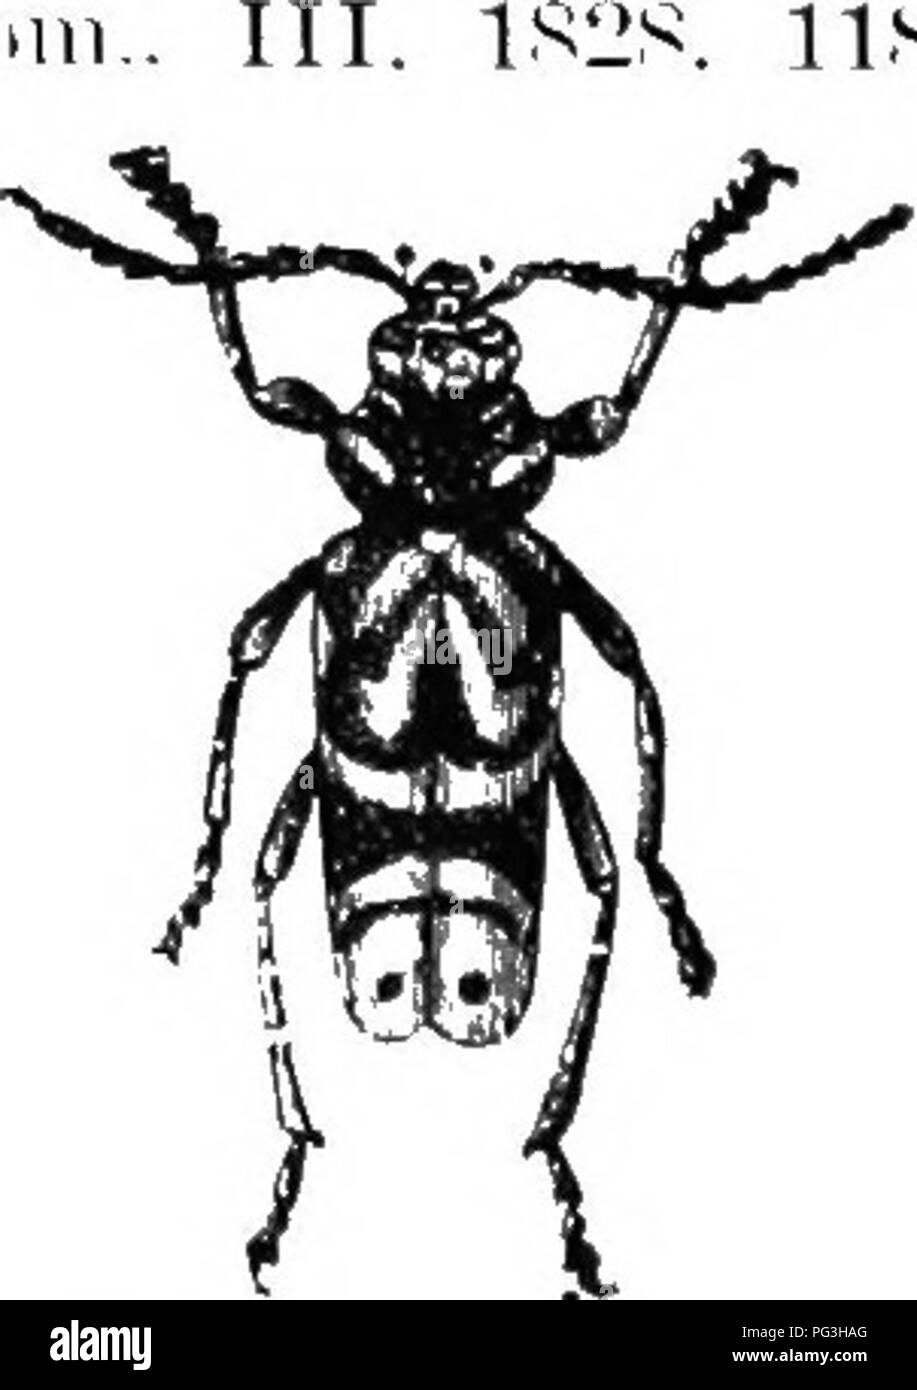 . An illustrated descriptive catalogue of the coleoptera or beetles (exclusive of the Rhynchophora) known to occur in Indiana : with bibliography and descriptions of new species . Beetles. Fig. 439. Female. X 21. (Atter Hopkins in Cire. No. 83. Bur. Ent. U. S. Dept. Agr.) being taken &quot;near th'e end of August.' ll.'^. XXVIII. PLA.iioxoTrp Muls. 1S42. ((h, &quot;oblique + back.'&quot; i This genus contains only a single bii-oc specie's, distinguished from its alli(-s by the heaAder coinpresFU'd antenna.'. 191.3 (017:11. I'l A(iii)NOTi's KPECiosis i^ay, .iiier. Kntoni.. pi 5.3; iliid. 1, l Stock Photo